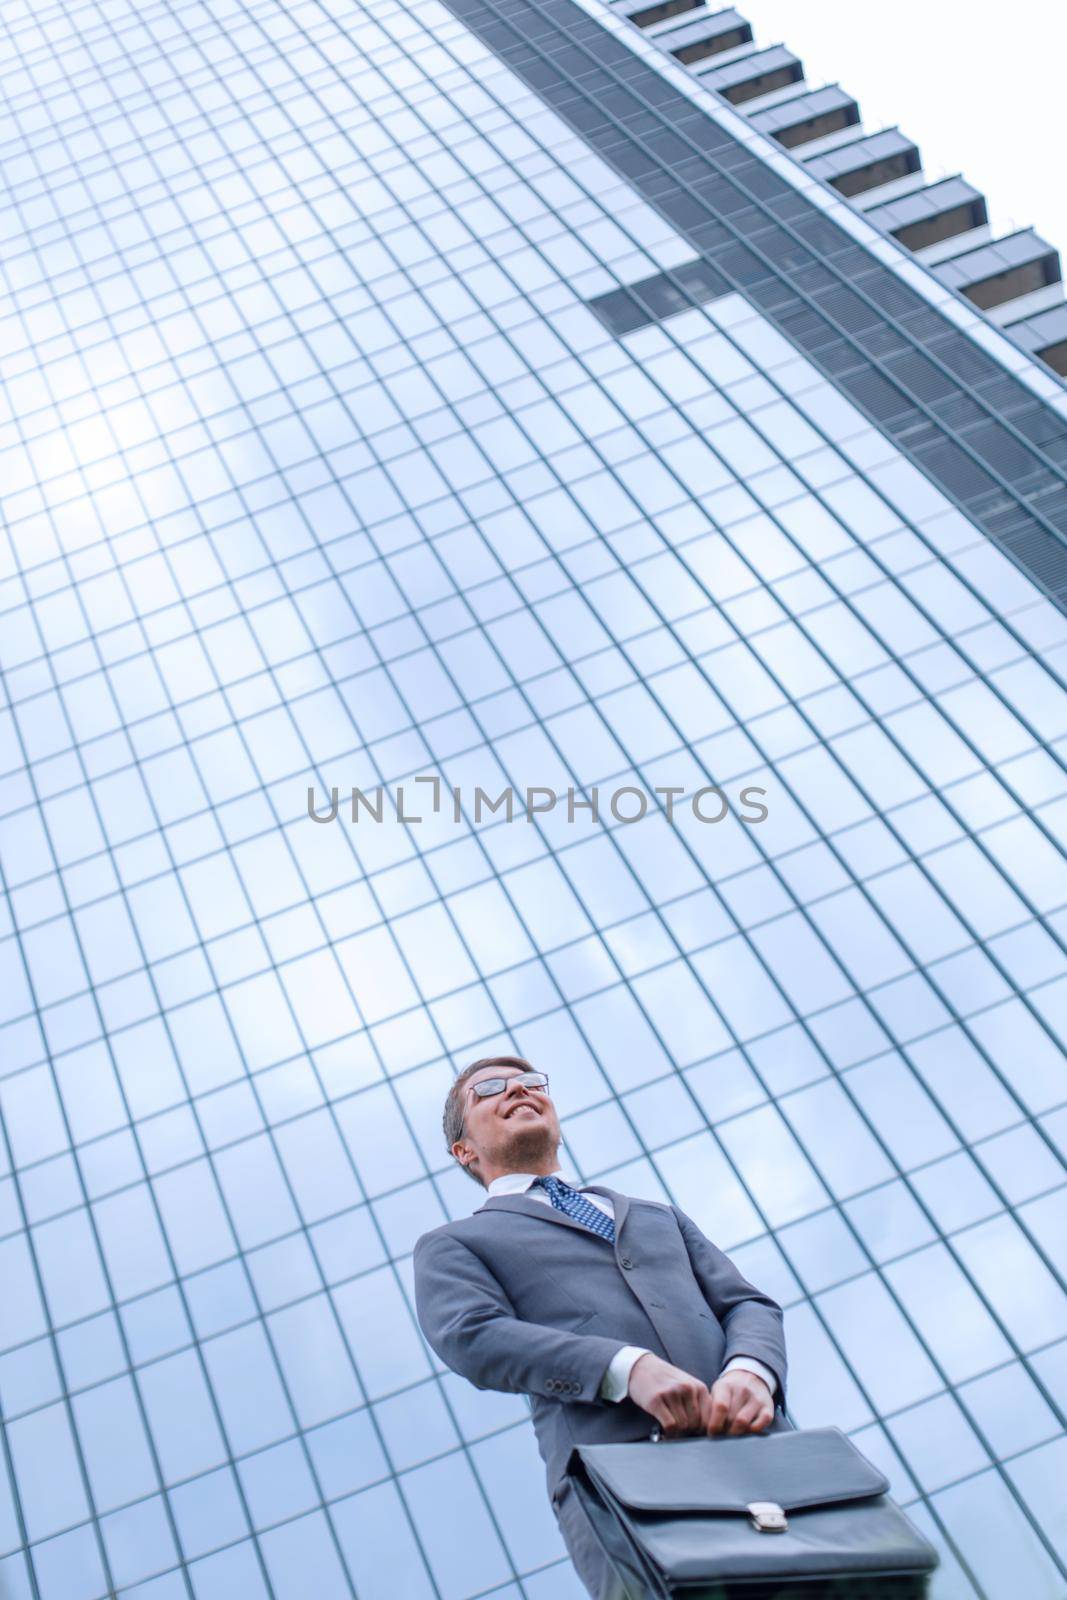 business man with briefcase standing on grass near tall office building. photo with copy space